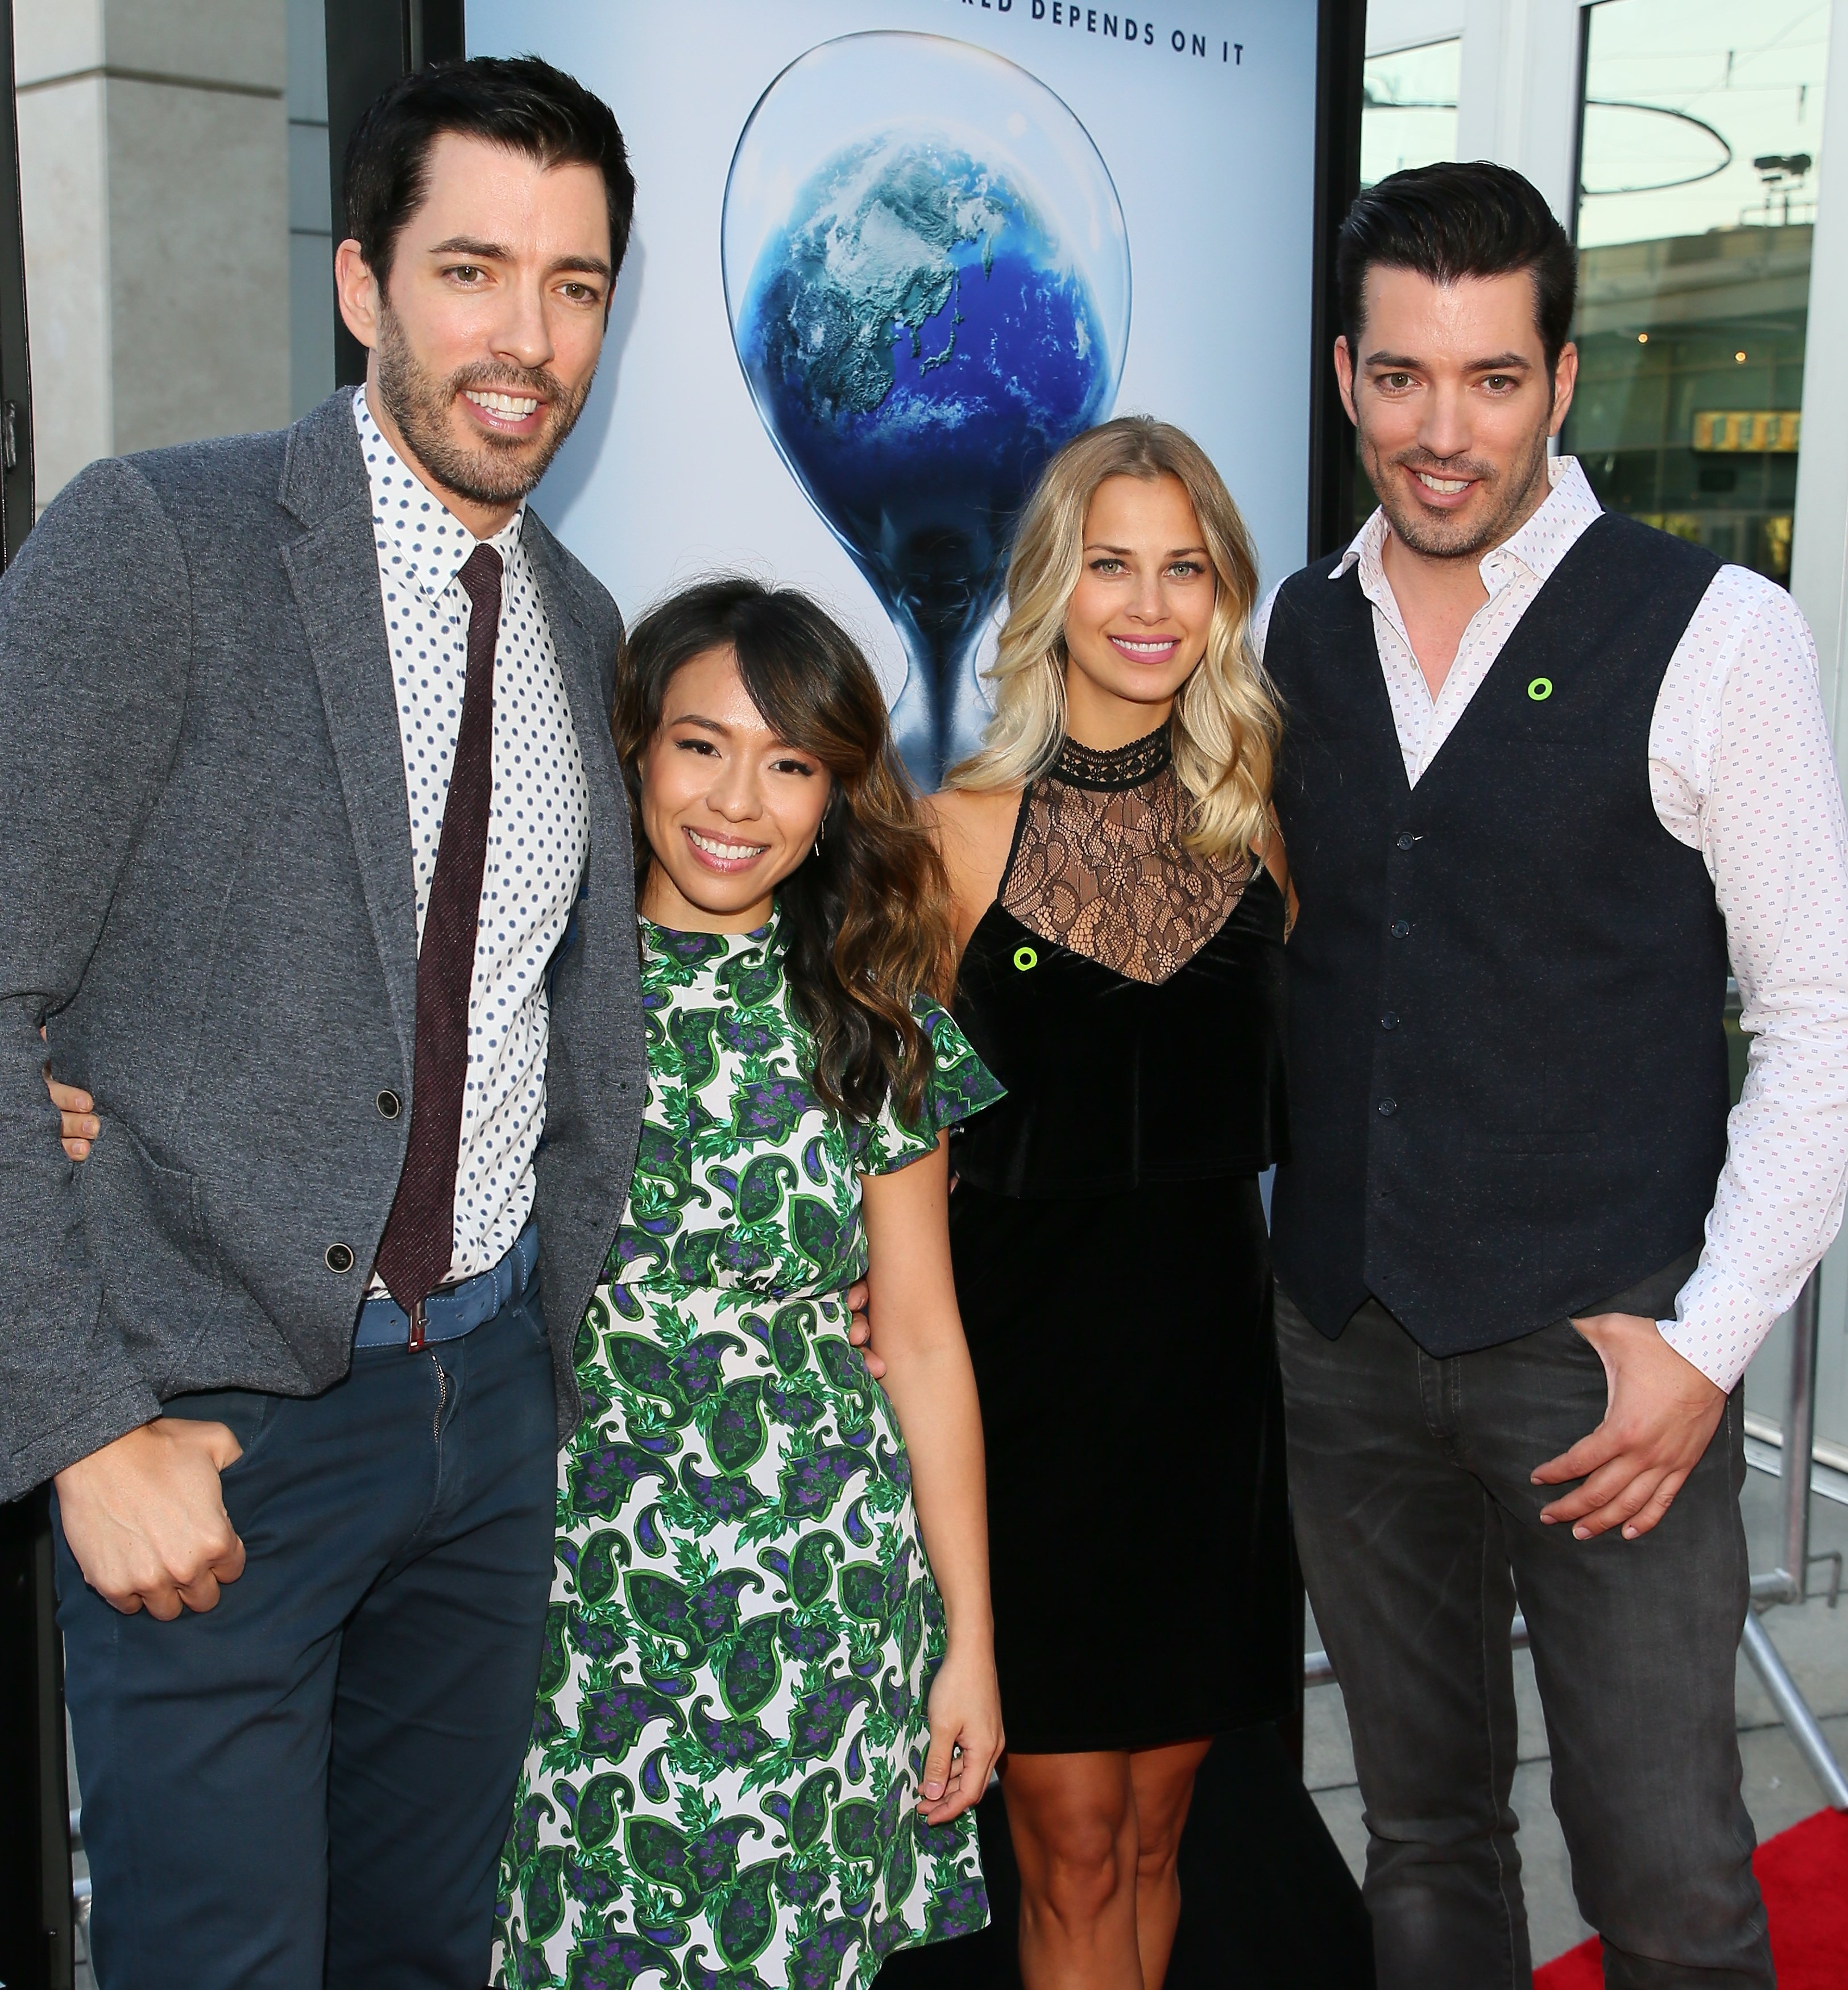 Drew Scott, Linda Phan, Jacinta Kuznetsov and Jonathan Scott attend a screening of Paramount Pictures' "An Inconvenient Sequel: Truth To Power" on July 25, 2017 in Hollywood, California | Source: Getty Images